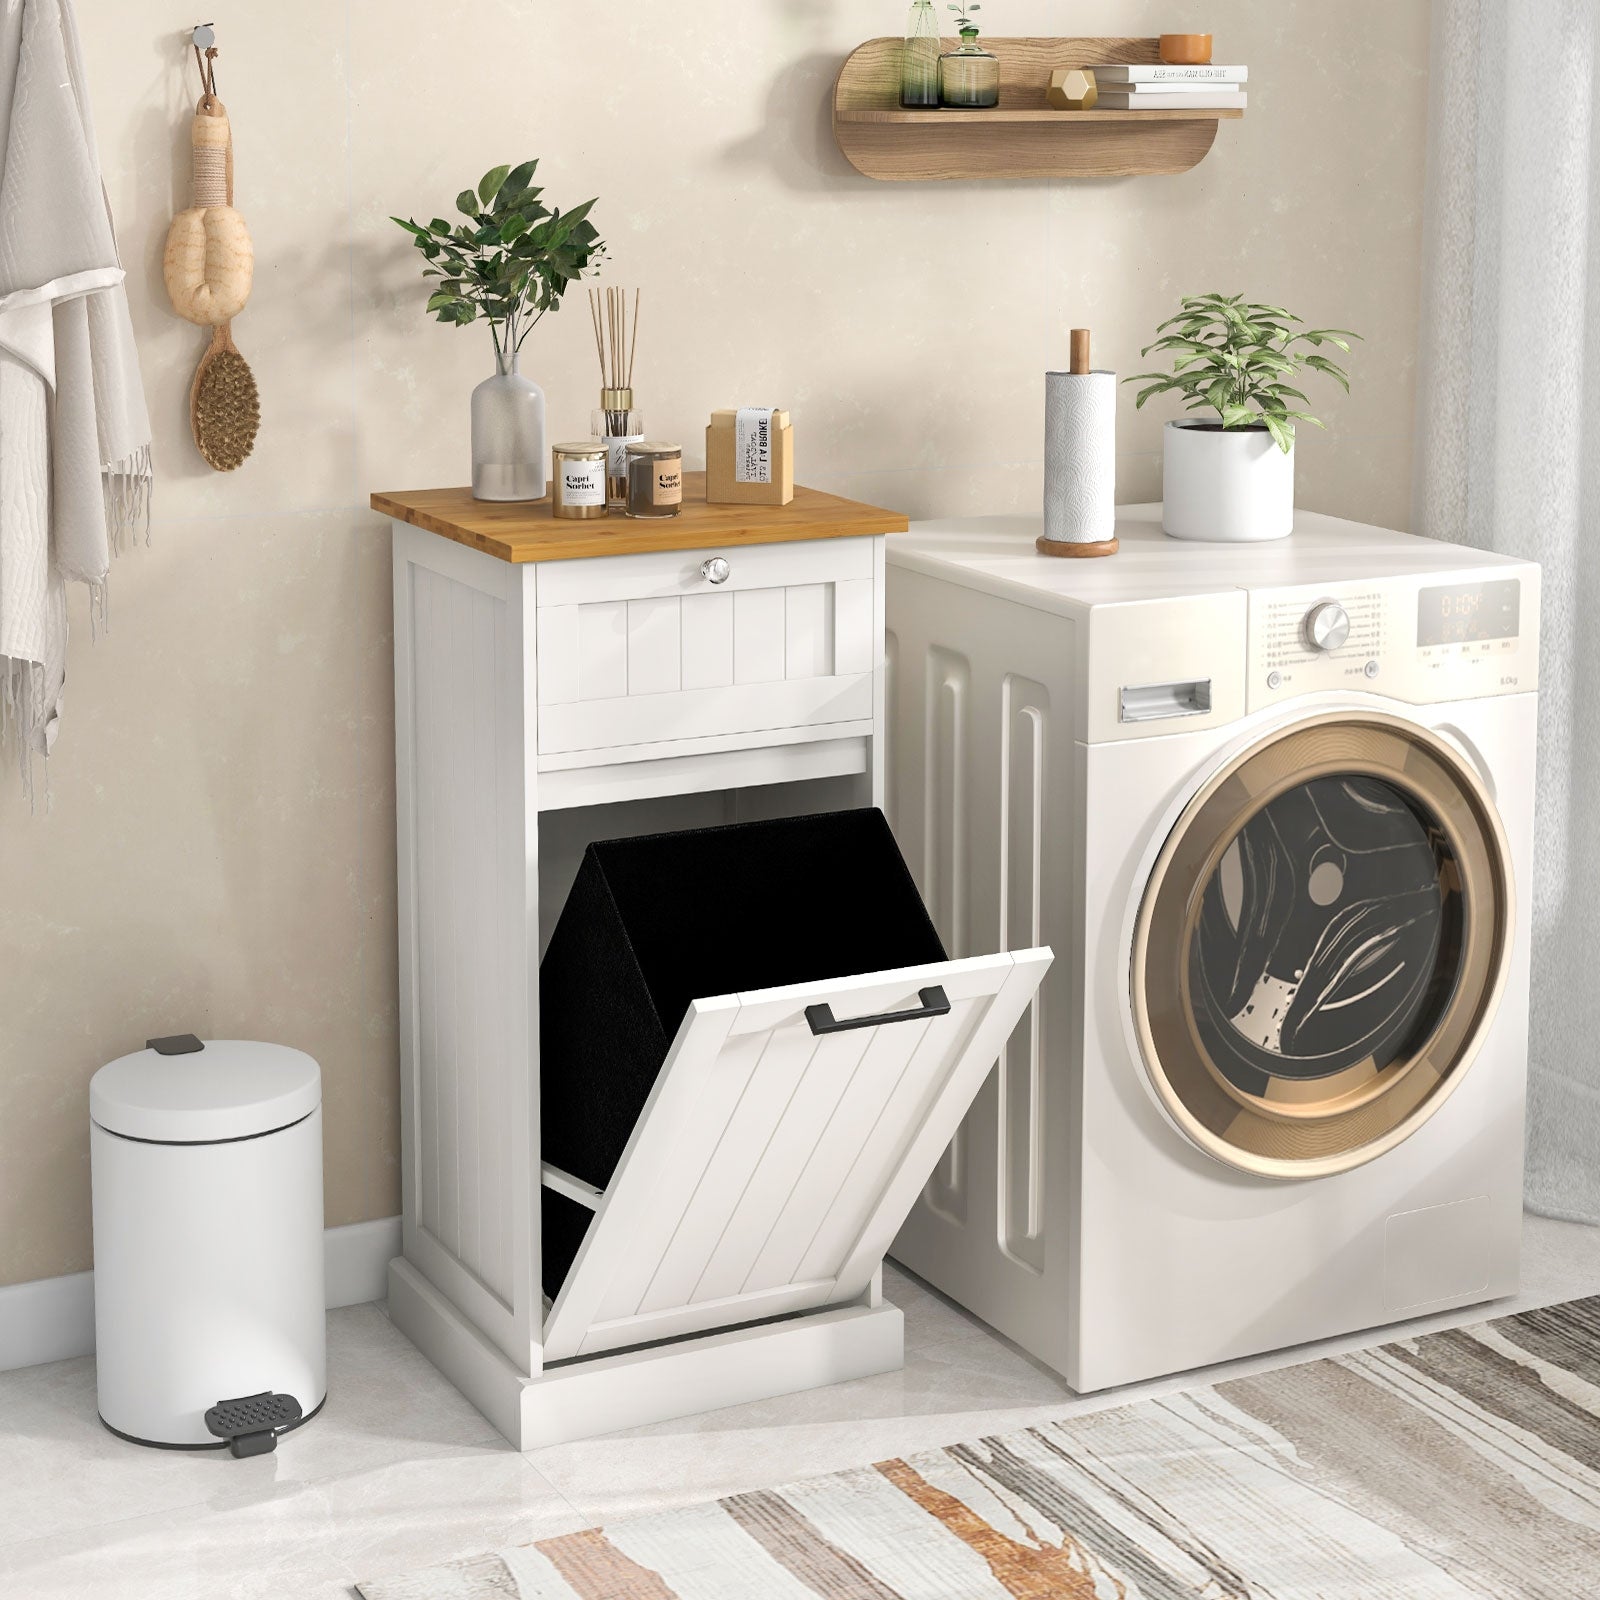 Freestanding Tilt Out Laundry Cabinet with Basket - Gallery Canada